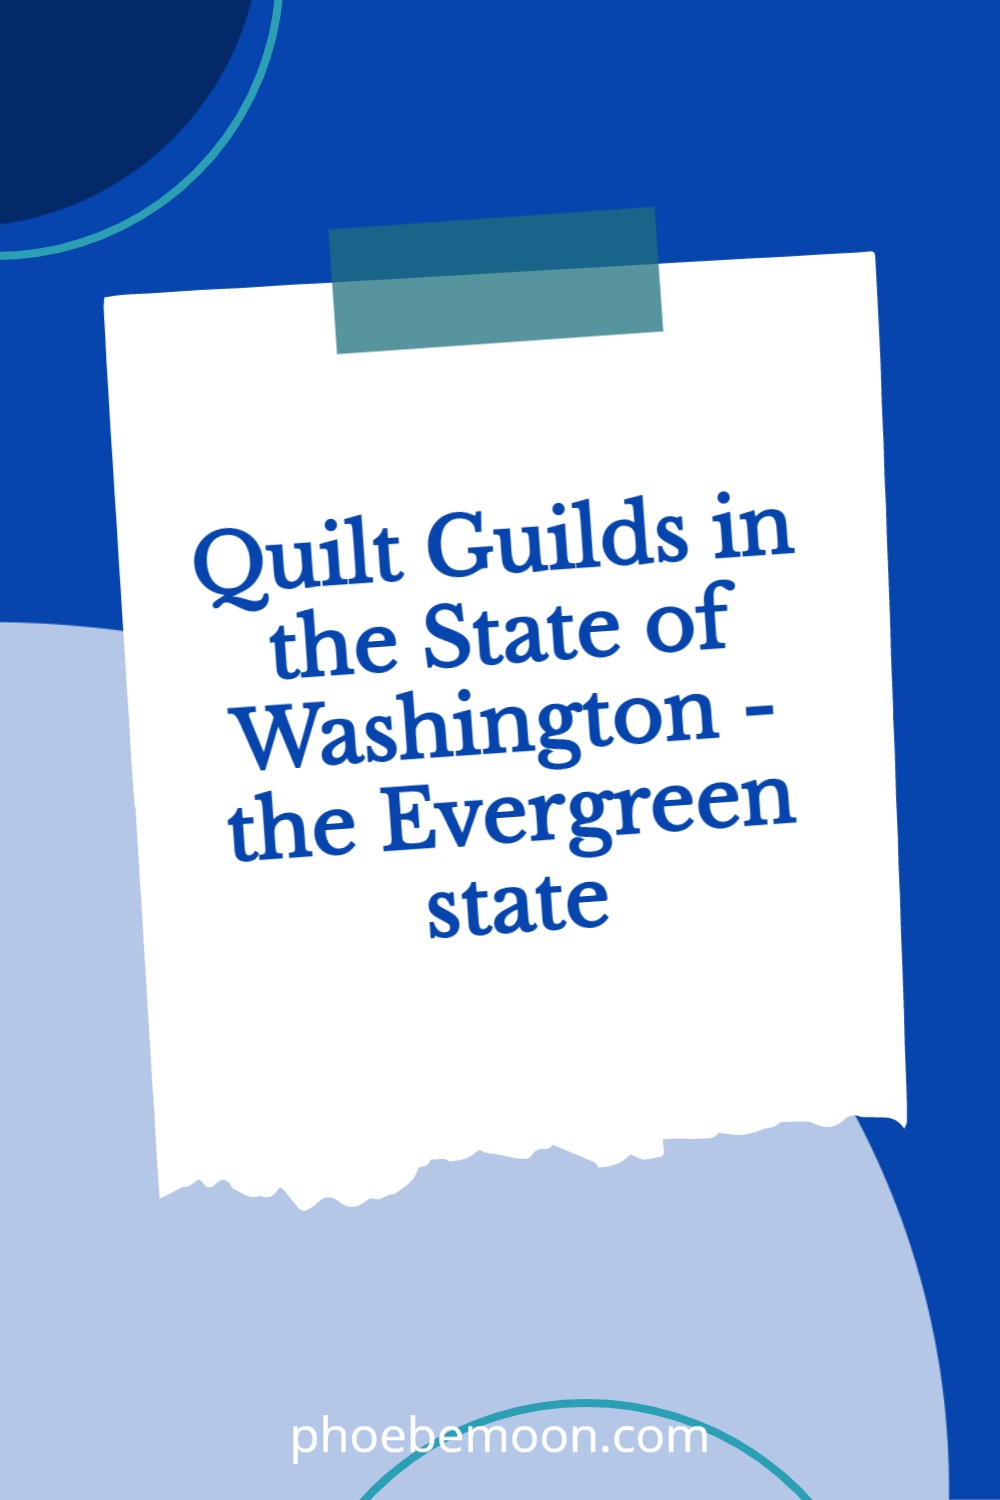 Quilting Guilds in Washington State for Quilters